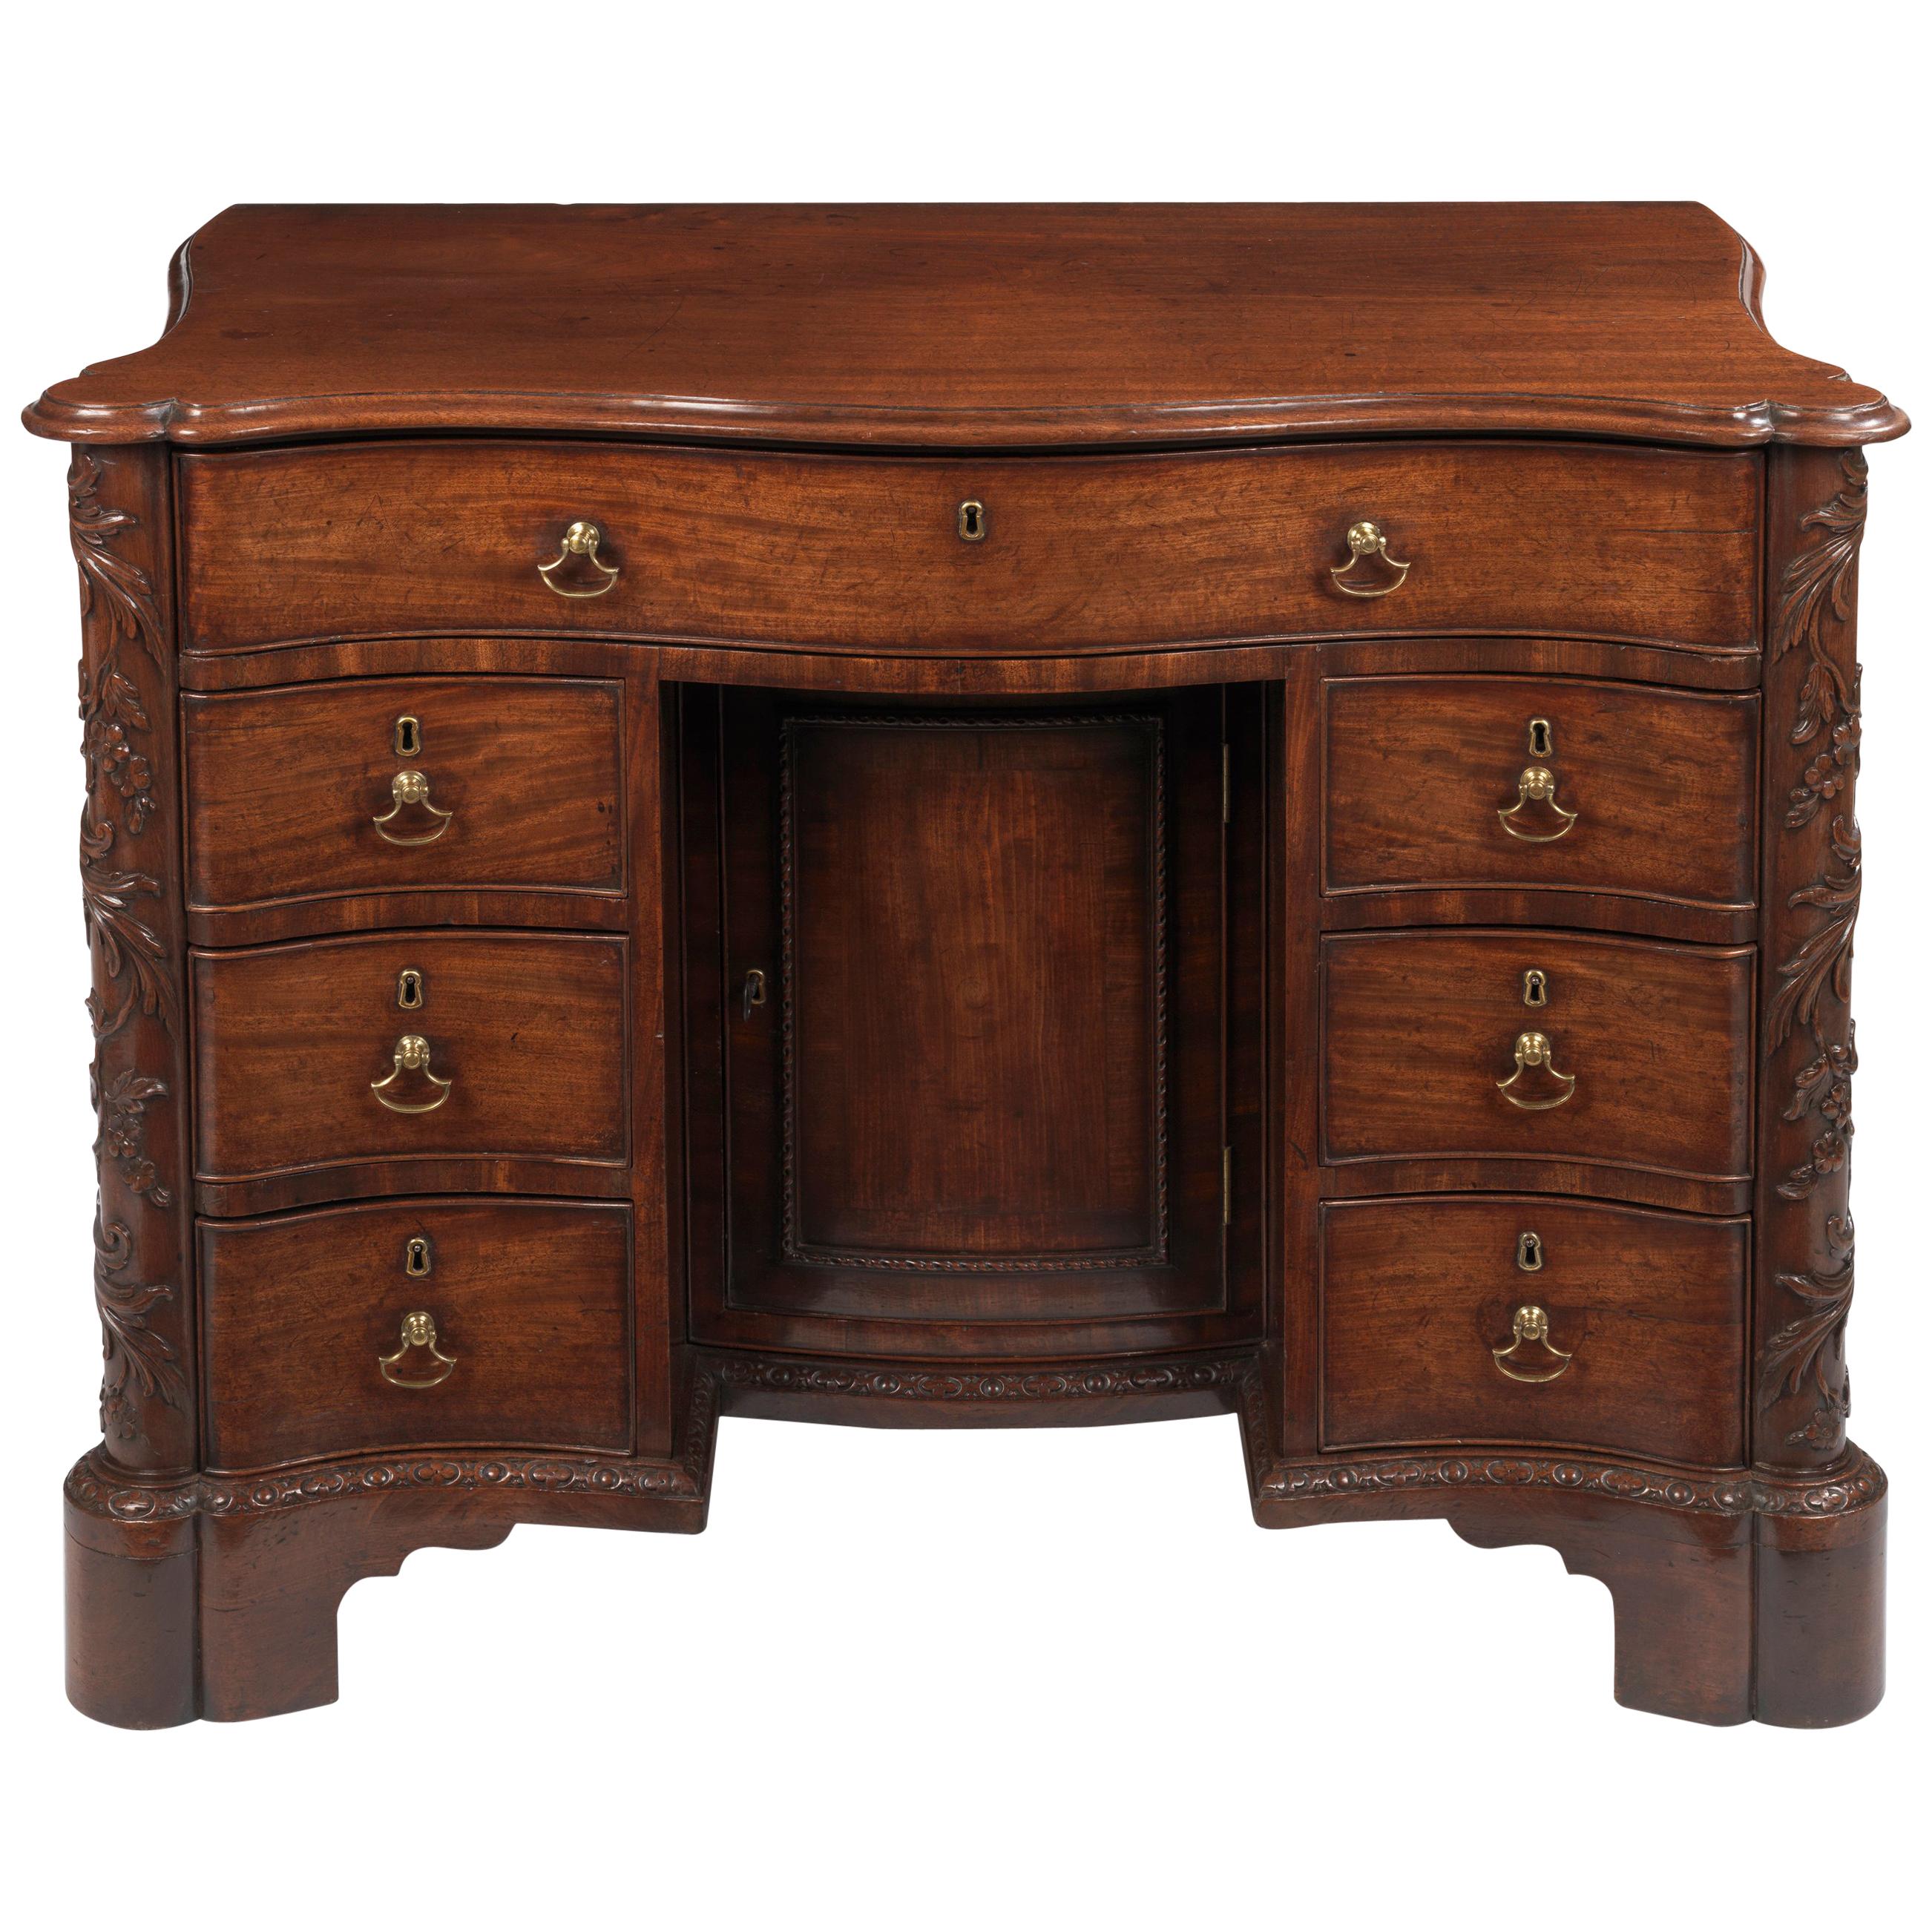 Rare and Important George II Commode Dressing Table, circa 1760 im Angebot